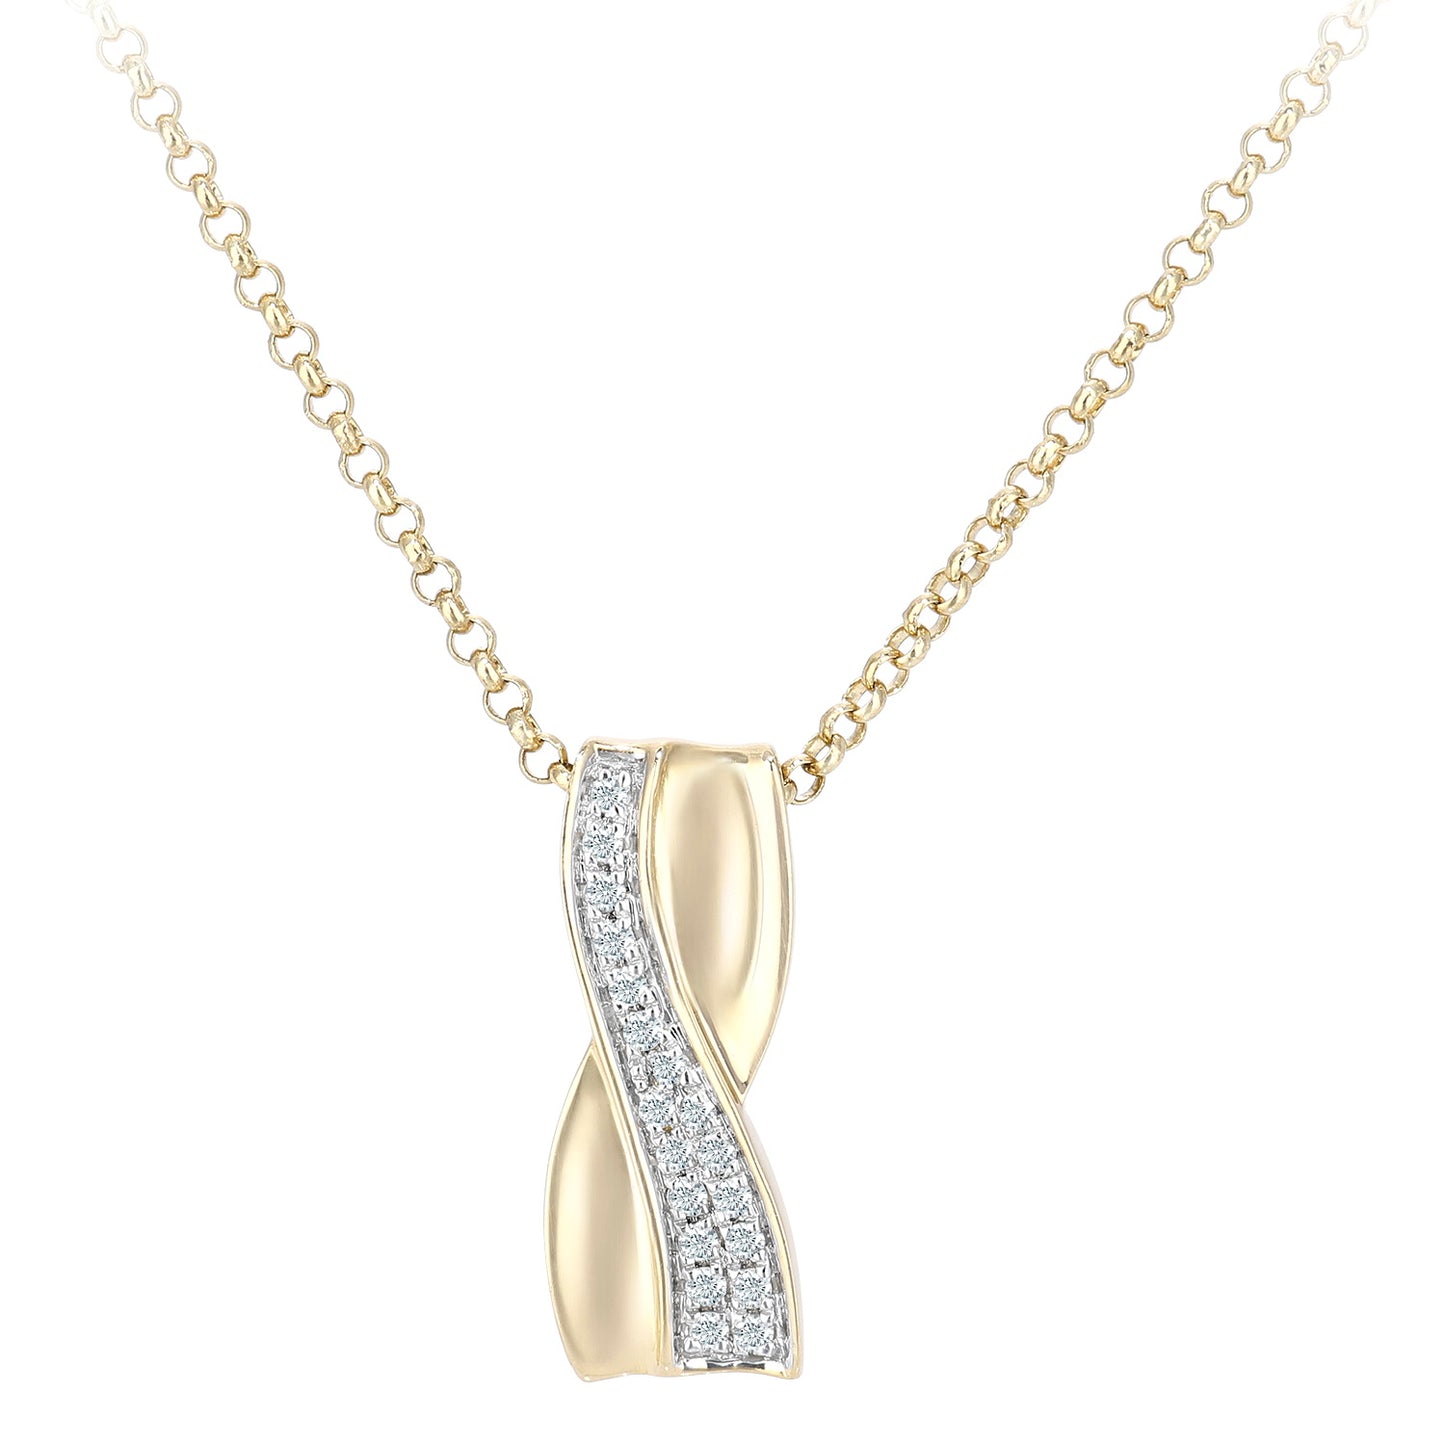 18ct Gold  Round 5pts Diamond Kiss Pendant Necklace 16 inch - DP1AXL624Y18